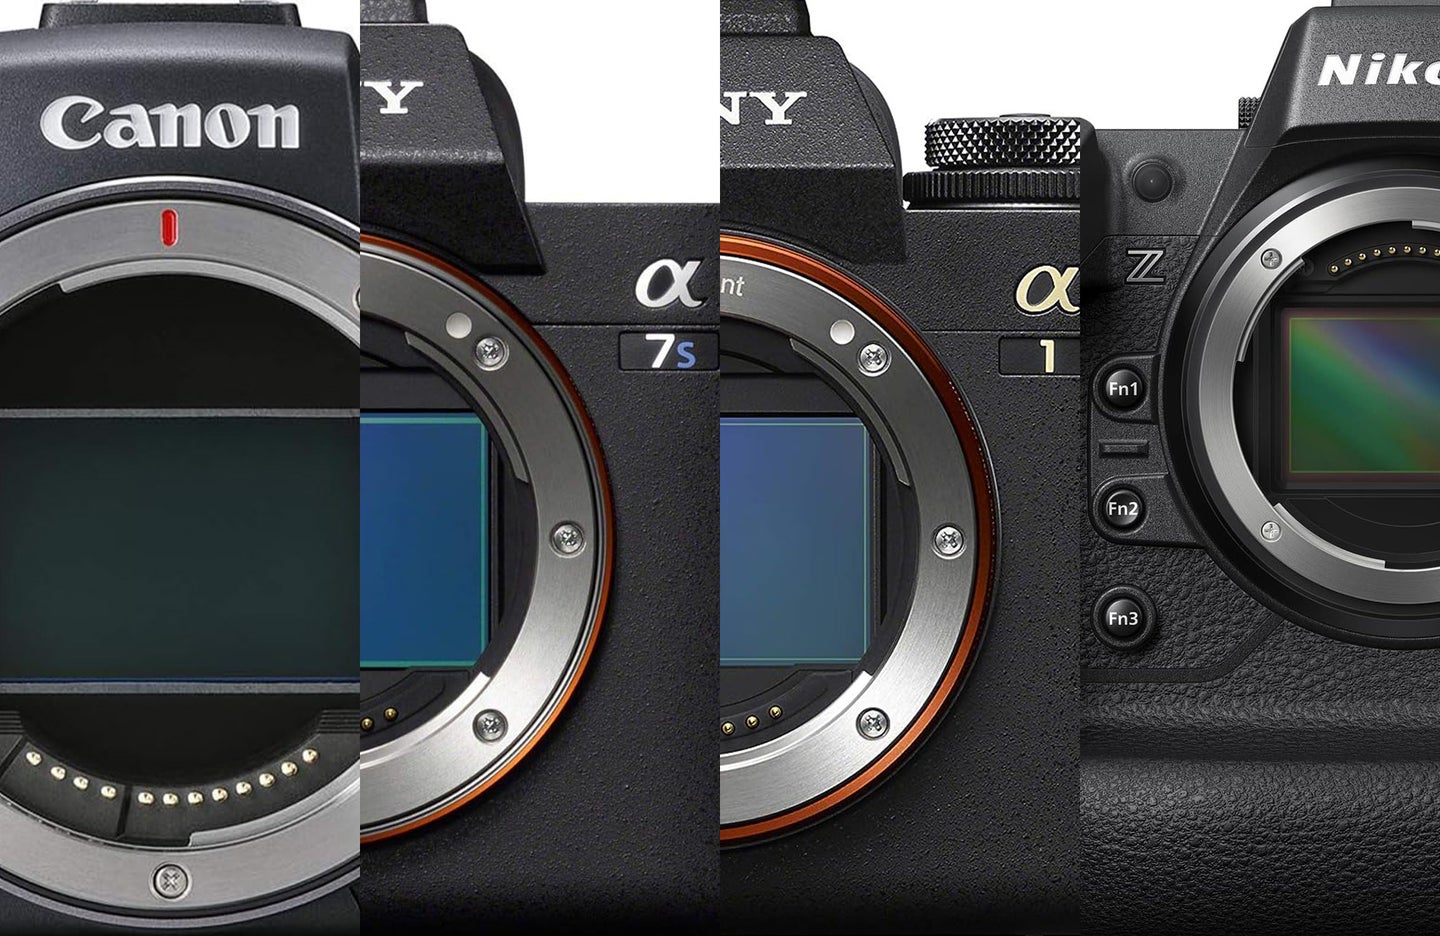 Full-frame camera with 5-axis image stabilization